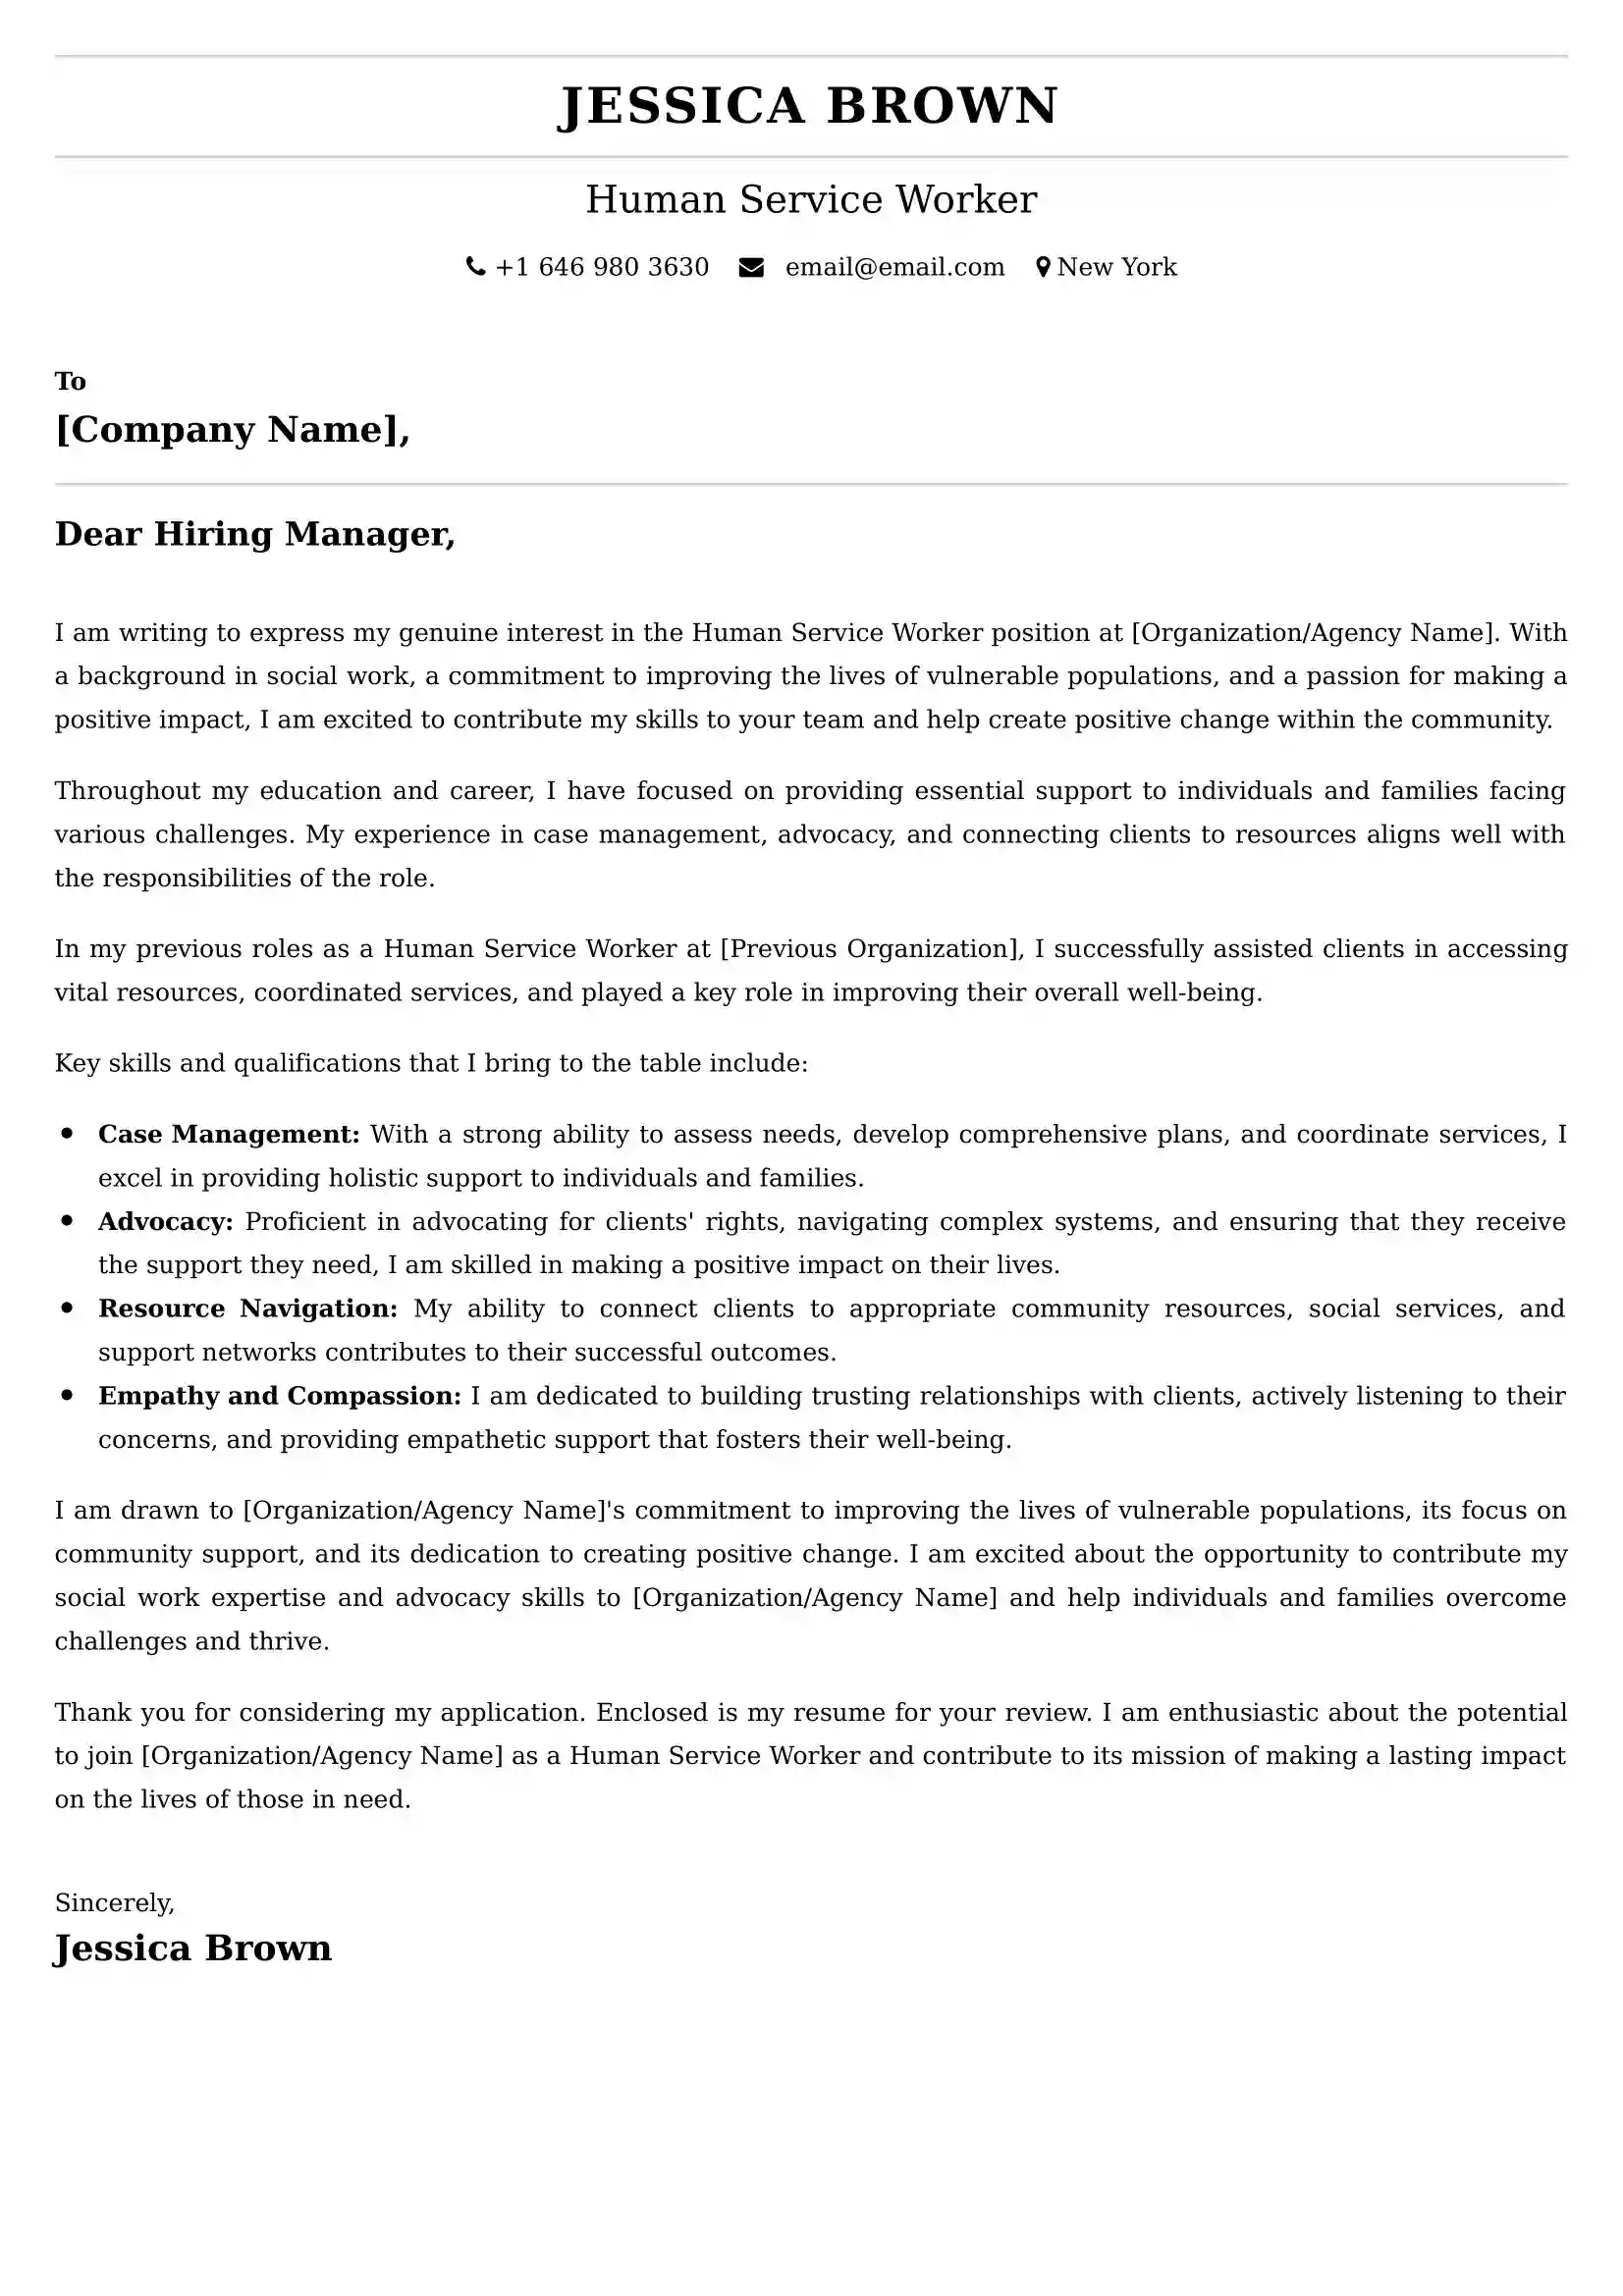 Human Service Worker Cover Letter Examples - Latest UK Format